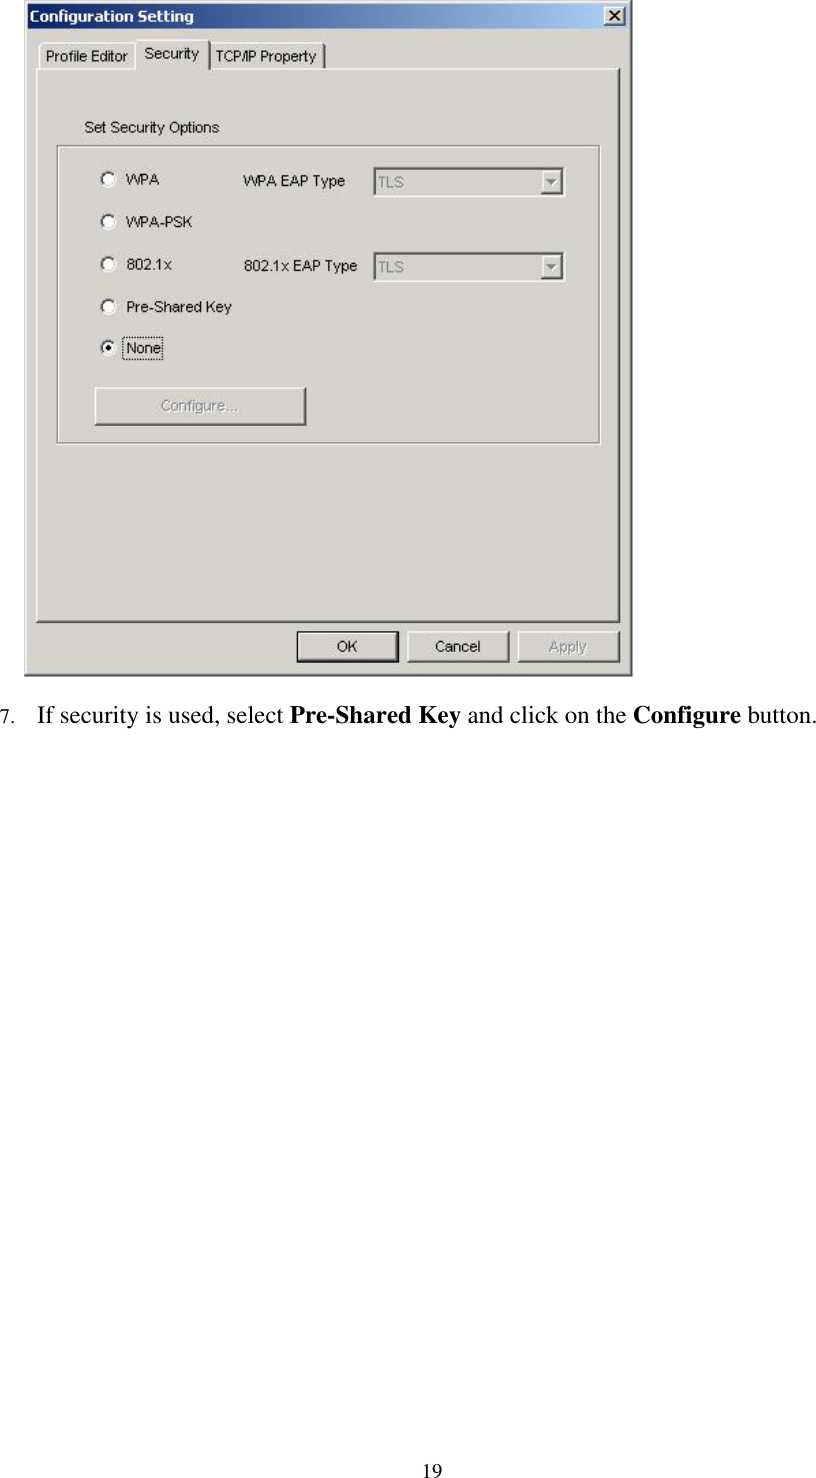  19    7. If security is used, select Pre-Shared Key and click on the Configure button.  